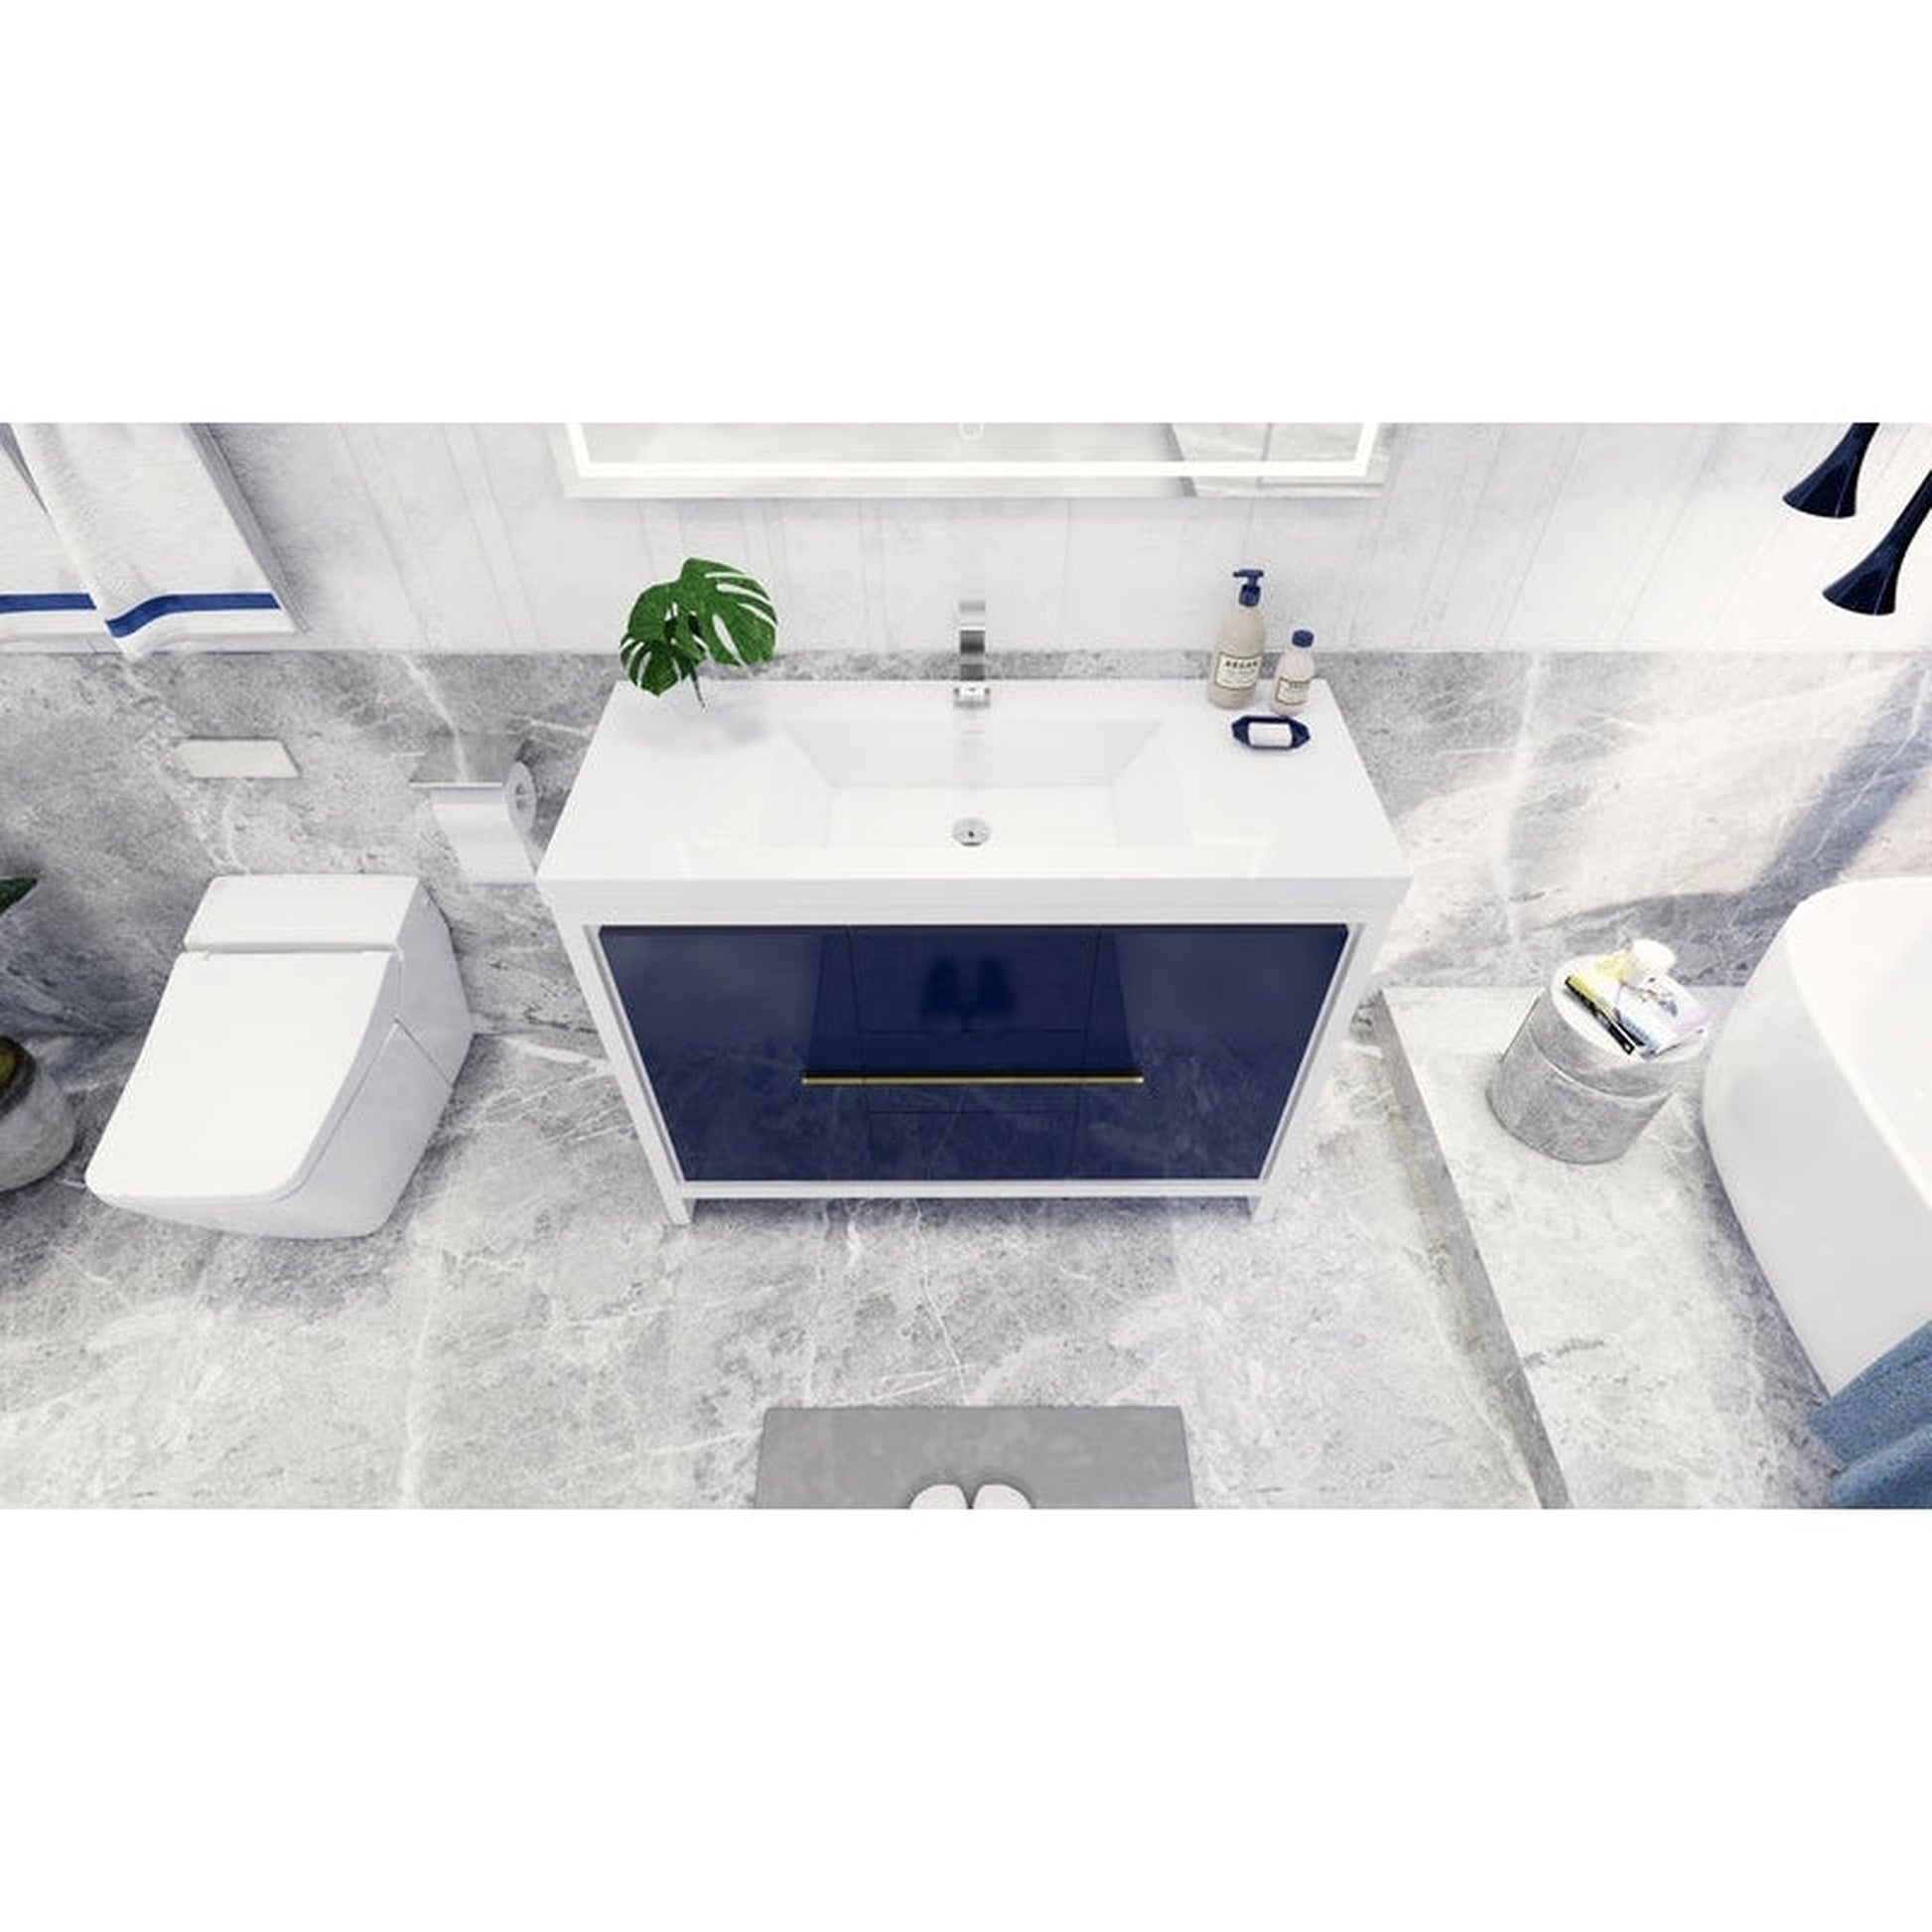 Moreno Bath Dolce 48" High Gloss Night Blue Freestanding Vanity With Single Reinforced White Acrylic Sink